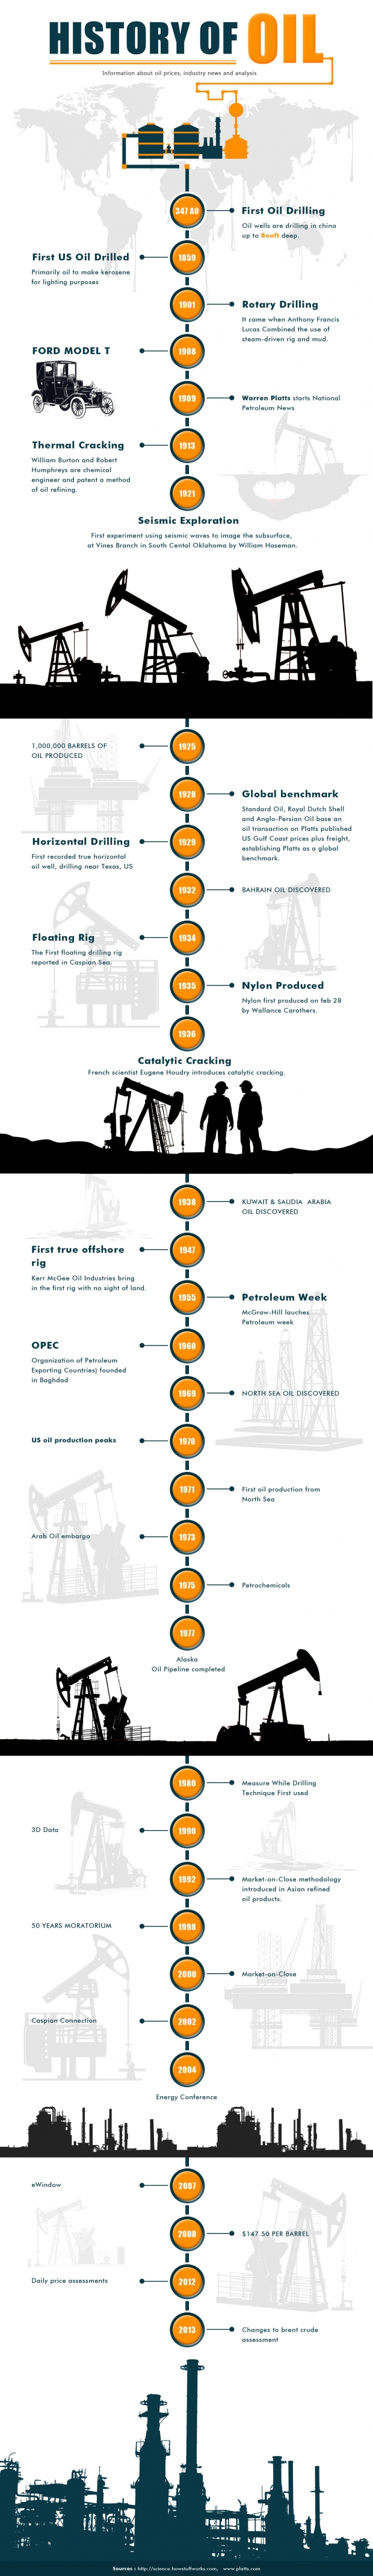 Infographic - History of oil